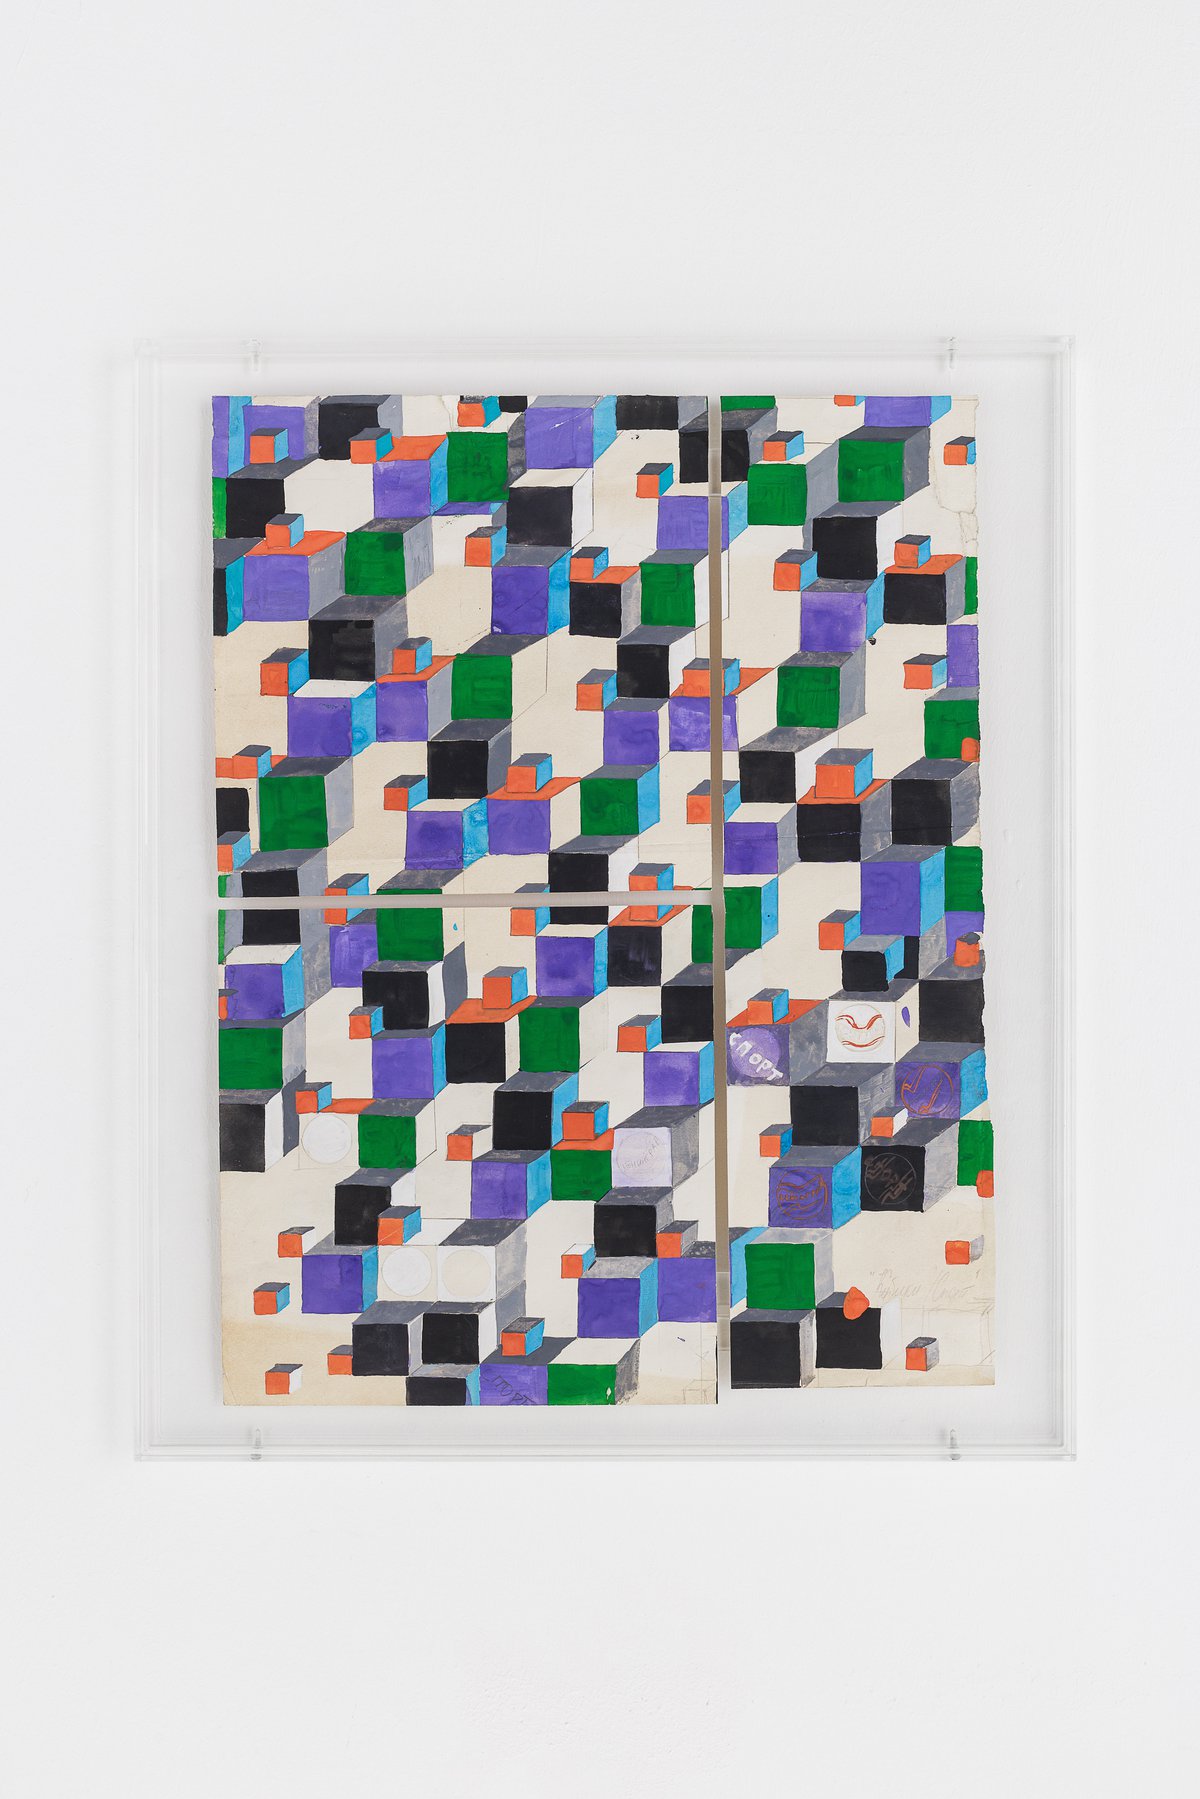 Anna AndreevaLittle Cubes (Sports), 1969Ink, gouache and pencil on paper52 x 62 cm (framed)